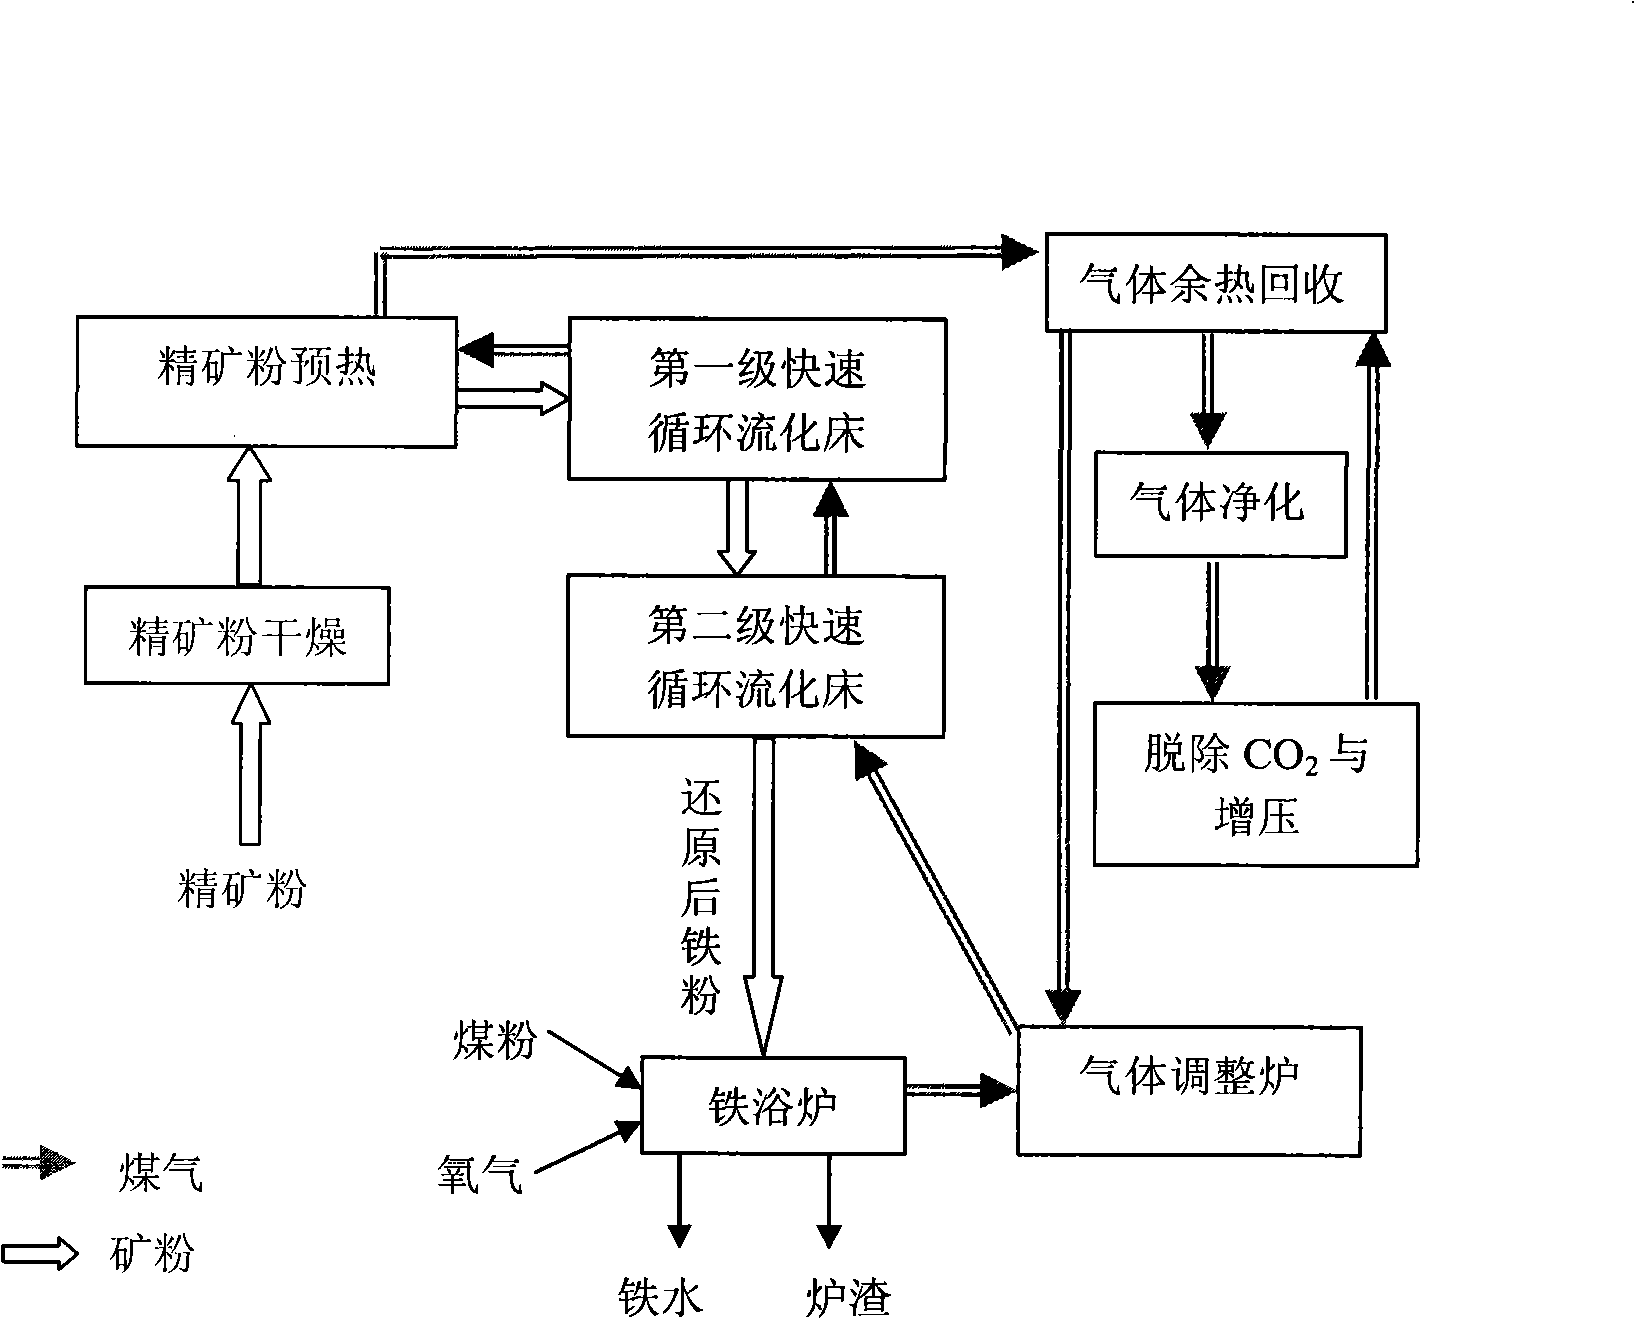 Fusion reduction iron-smelting method for directly using concentrate powder